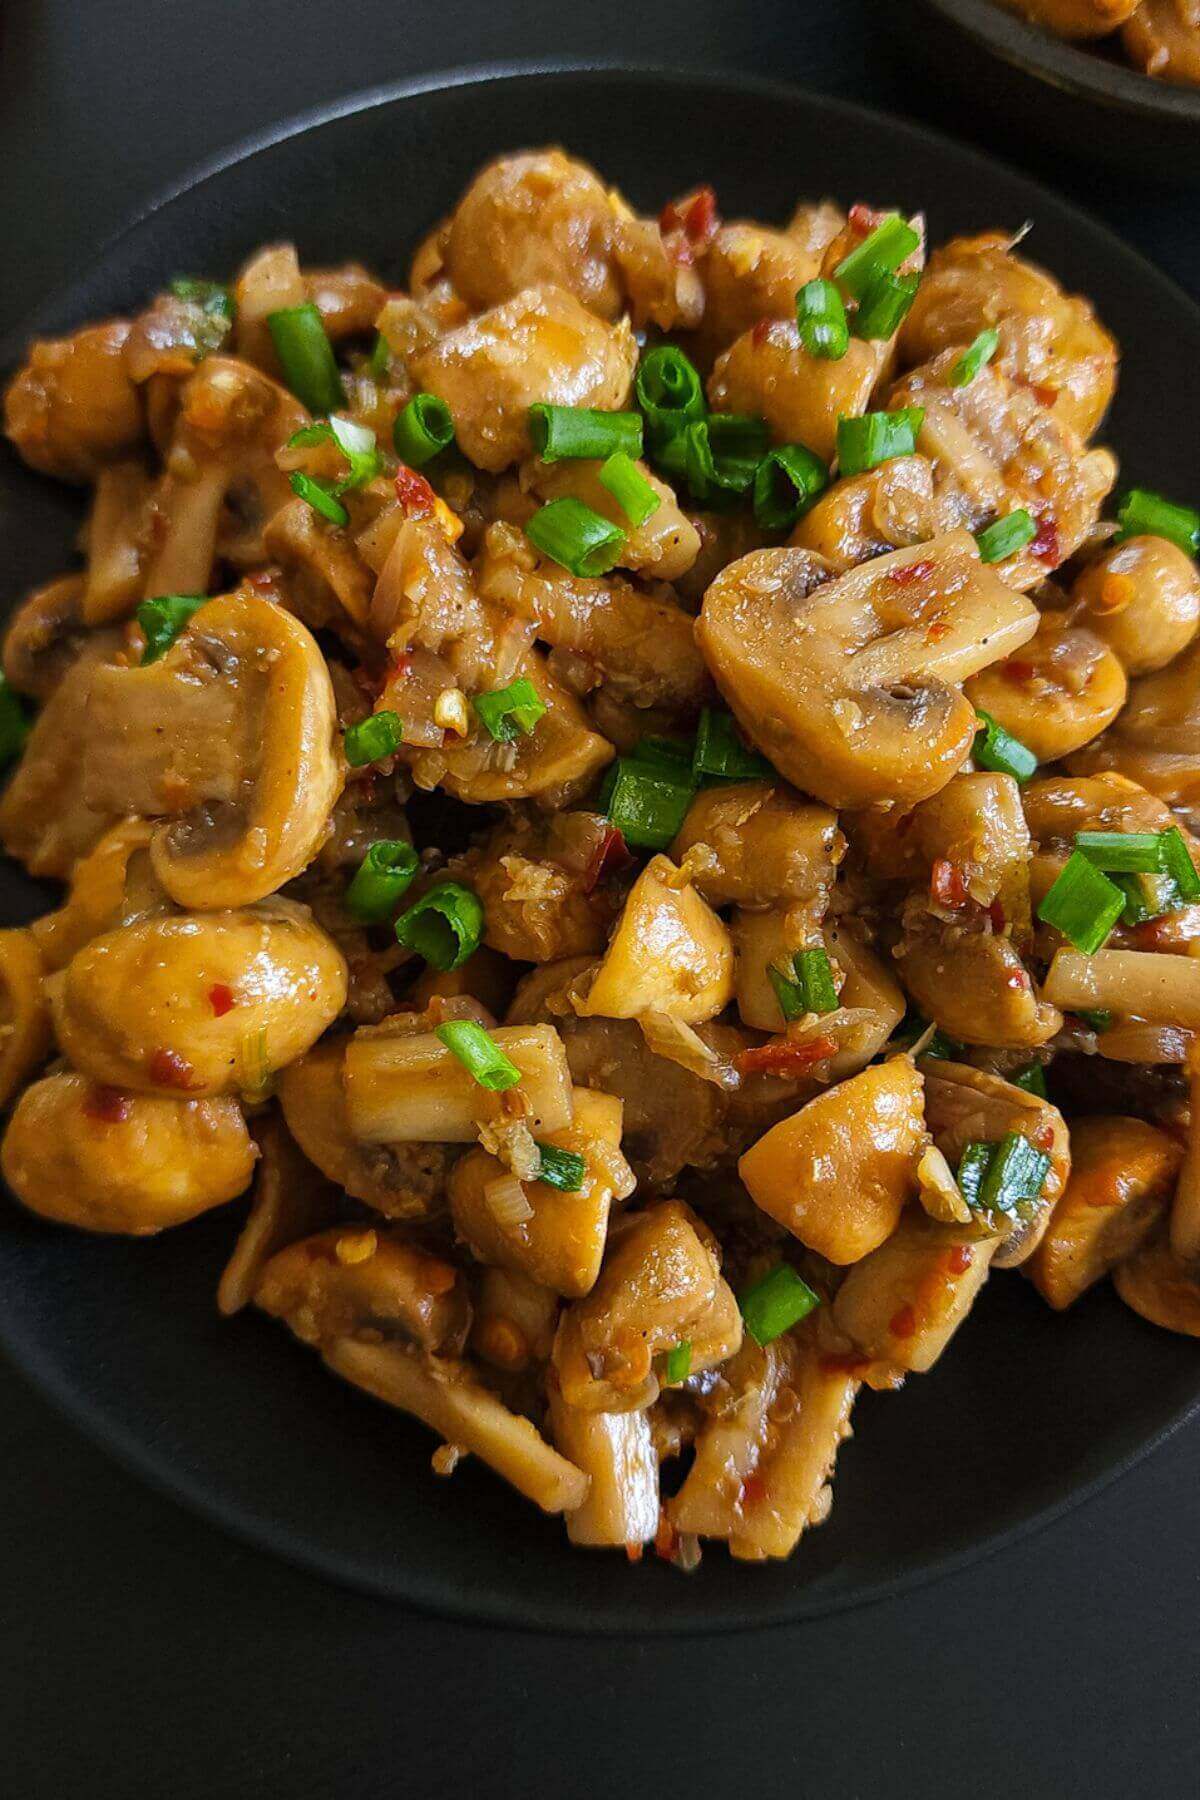 Spicy garlic mushrooms served on a black plate.